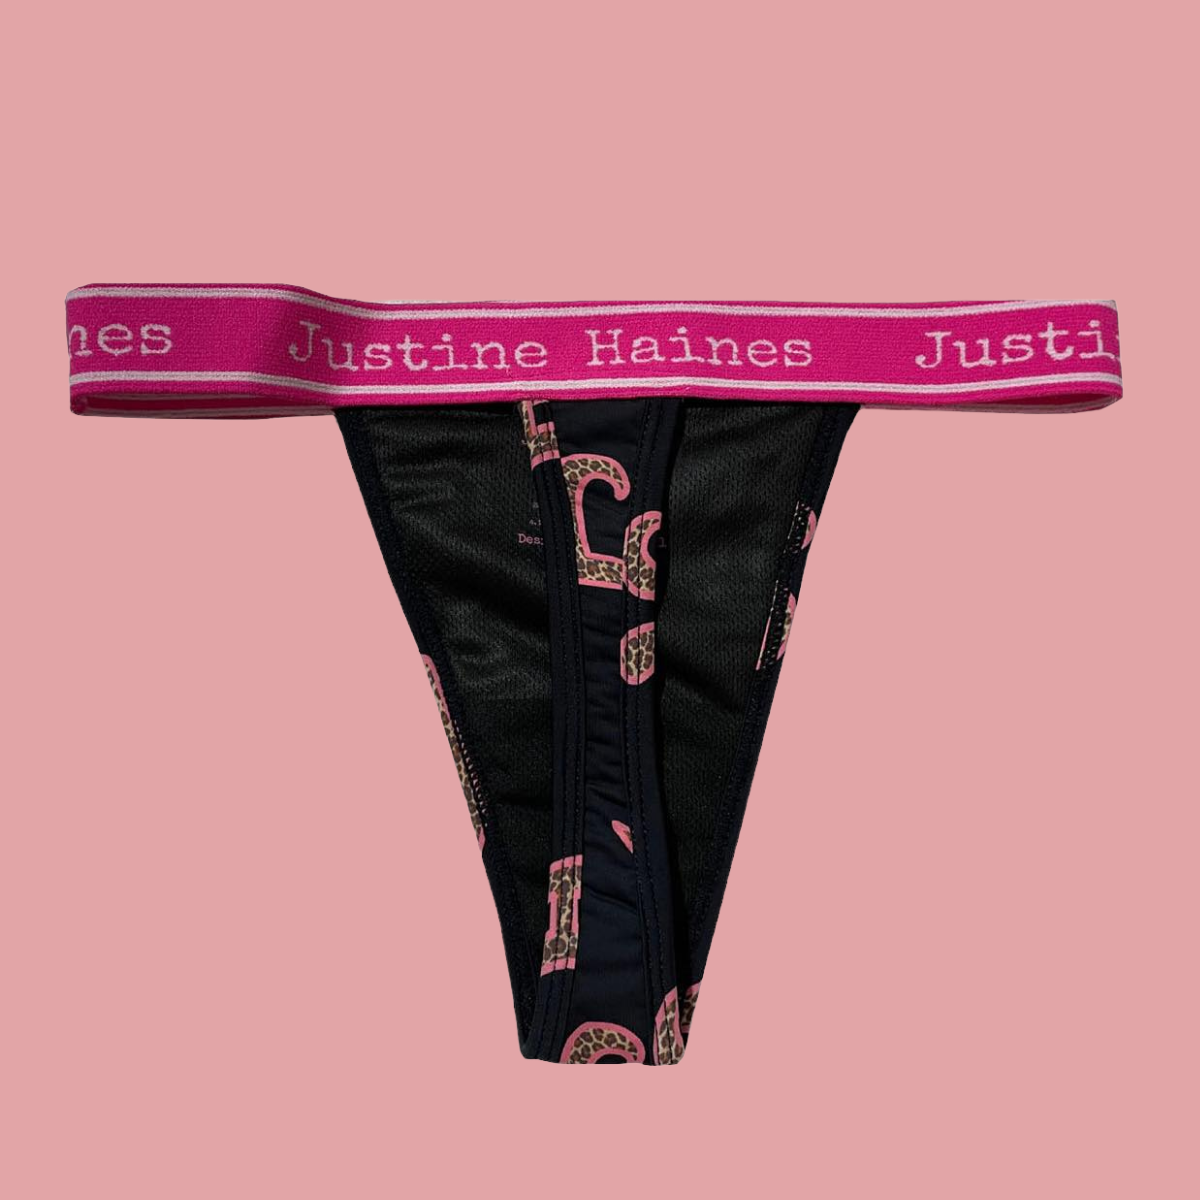 https://www.justinehaines.com/products/wear-thongs-on-your-period-jh-logo-with-leopard